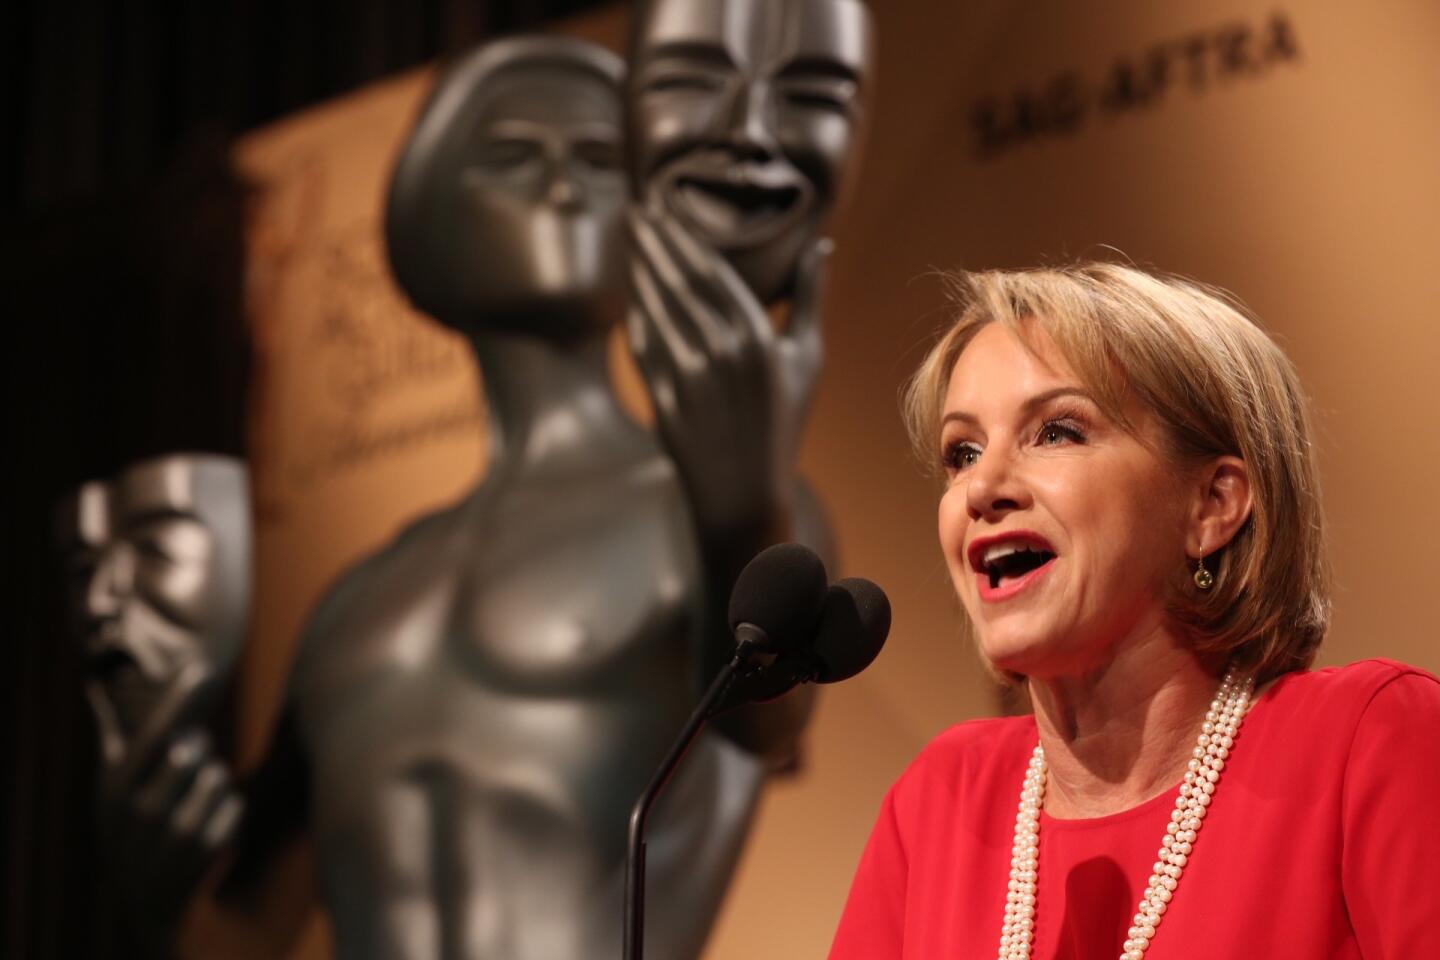 Gabrielle Carteris, SAG-AFTRA Executive Vice President, introduces the presenters for the 22nd Annual Screen Actors Guild Awards nominations from the Pacific Design Center in West Hollywood.